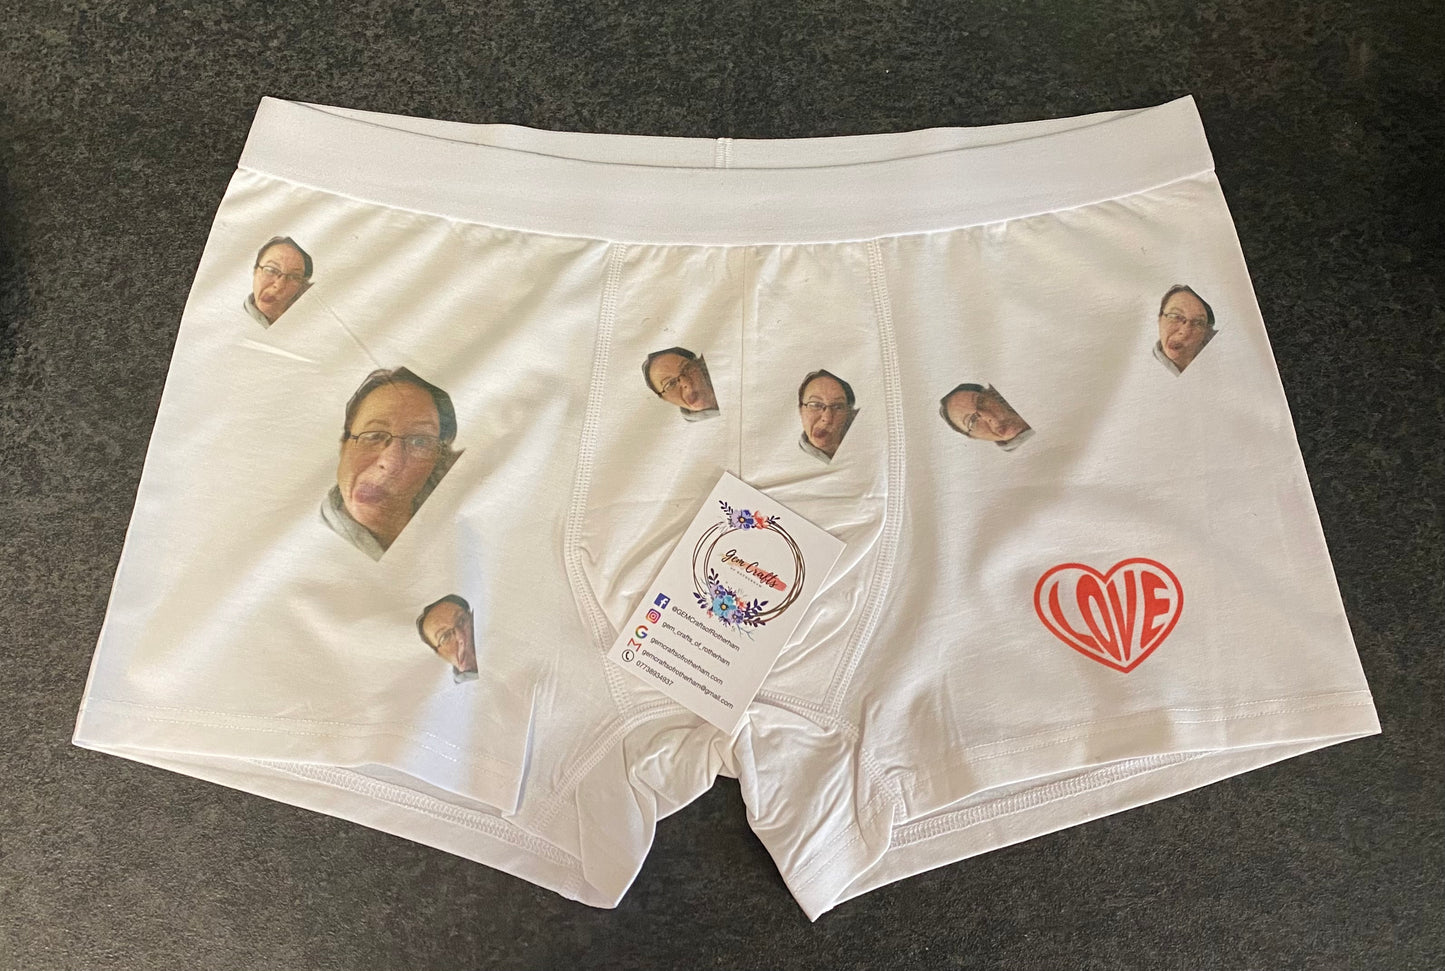 Personalised Boxer Shorts! Your Face on Boxers!